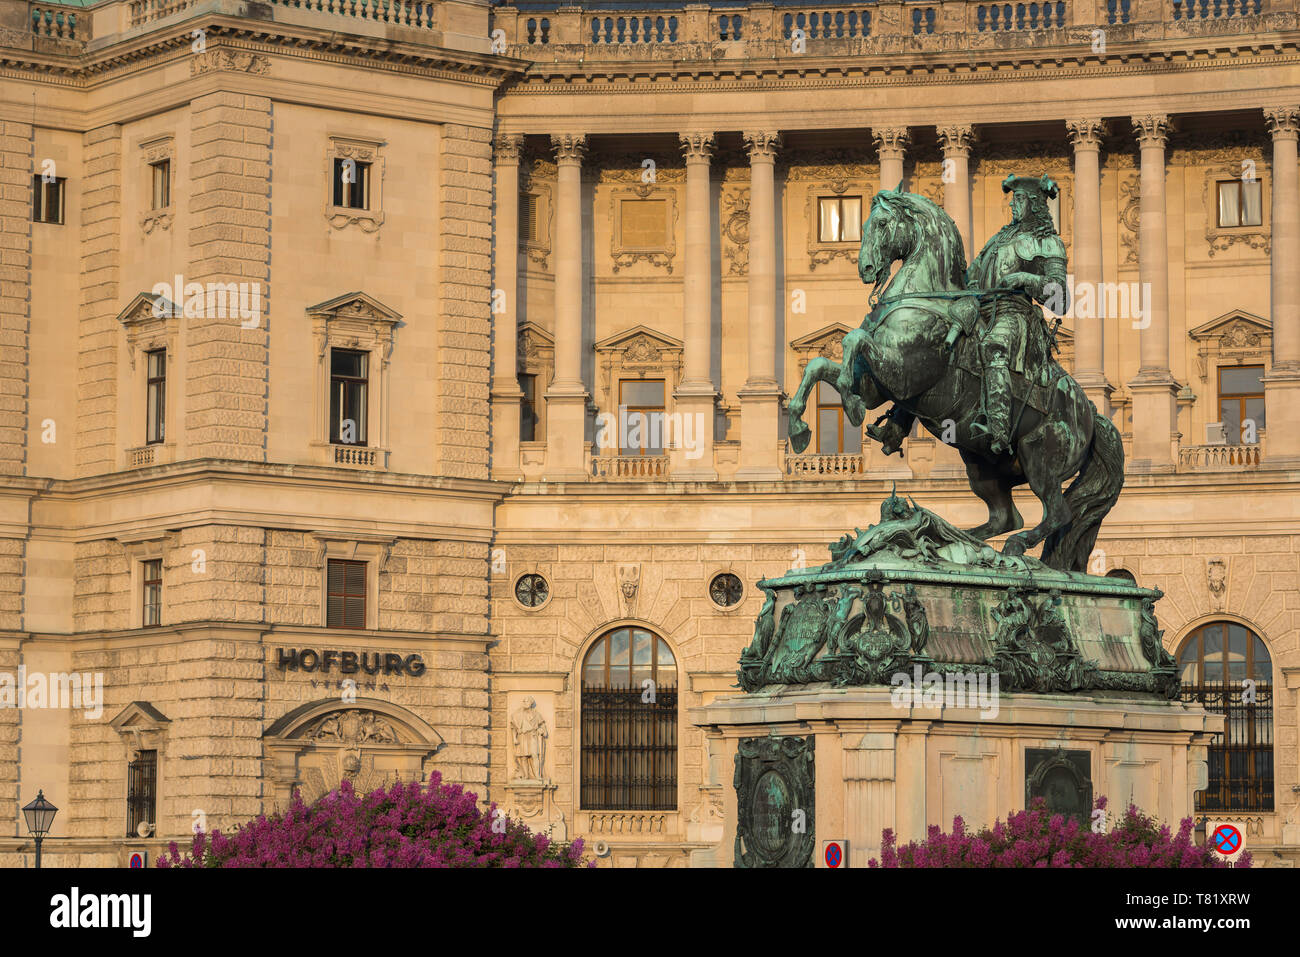 Vienna iconic, view of the statue of Prince Eugene of Savoy against the backdrop of the Neue Burg building in the Hofburg Palace complex, Wien Austria Stock Photo